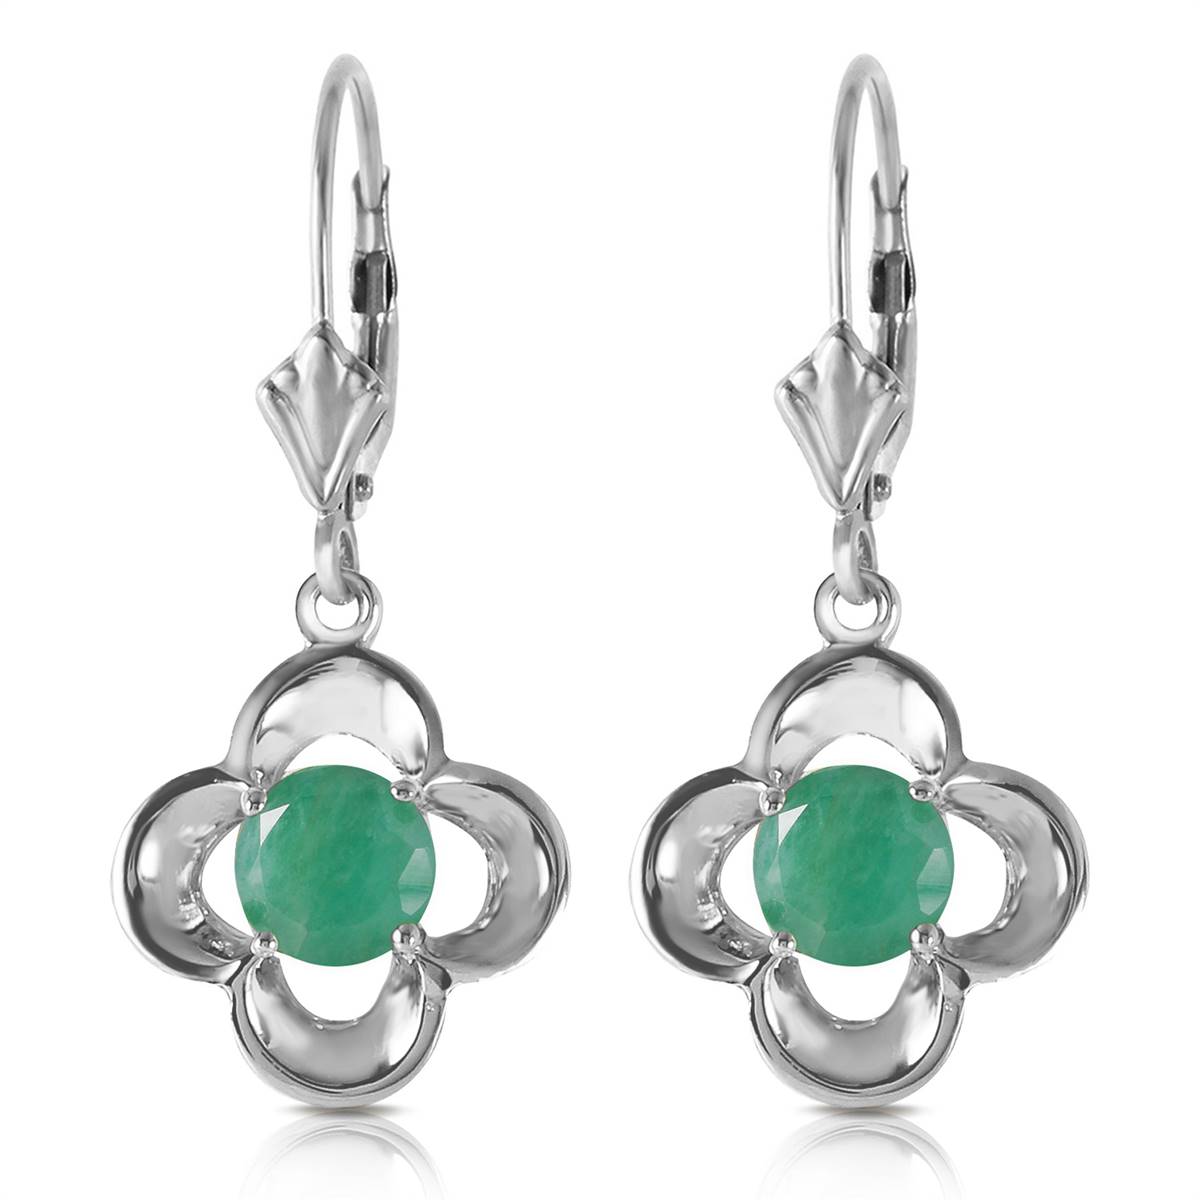 1.1 Carat 14K Solid White Gold Persuasion Emerald Earrings